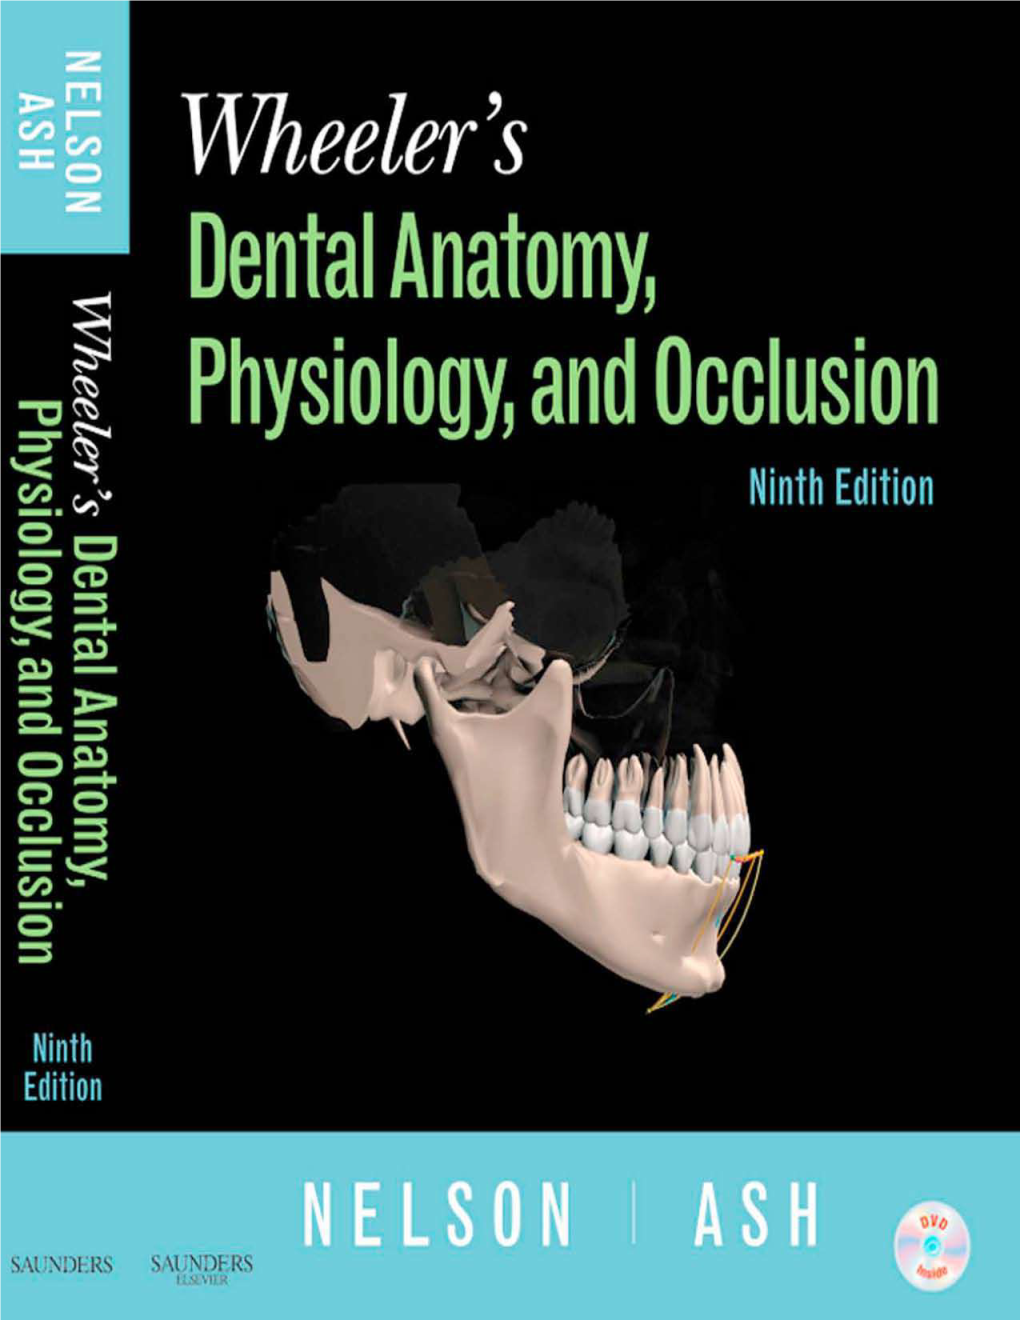 Wheeler's Dental Anatomy, Physiology and Occlusionversion